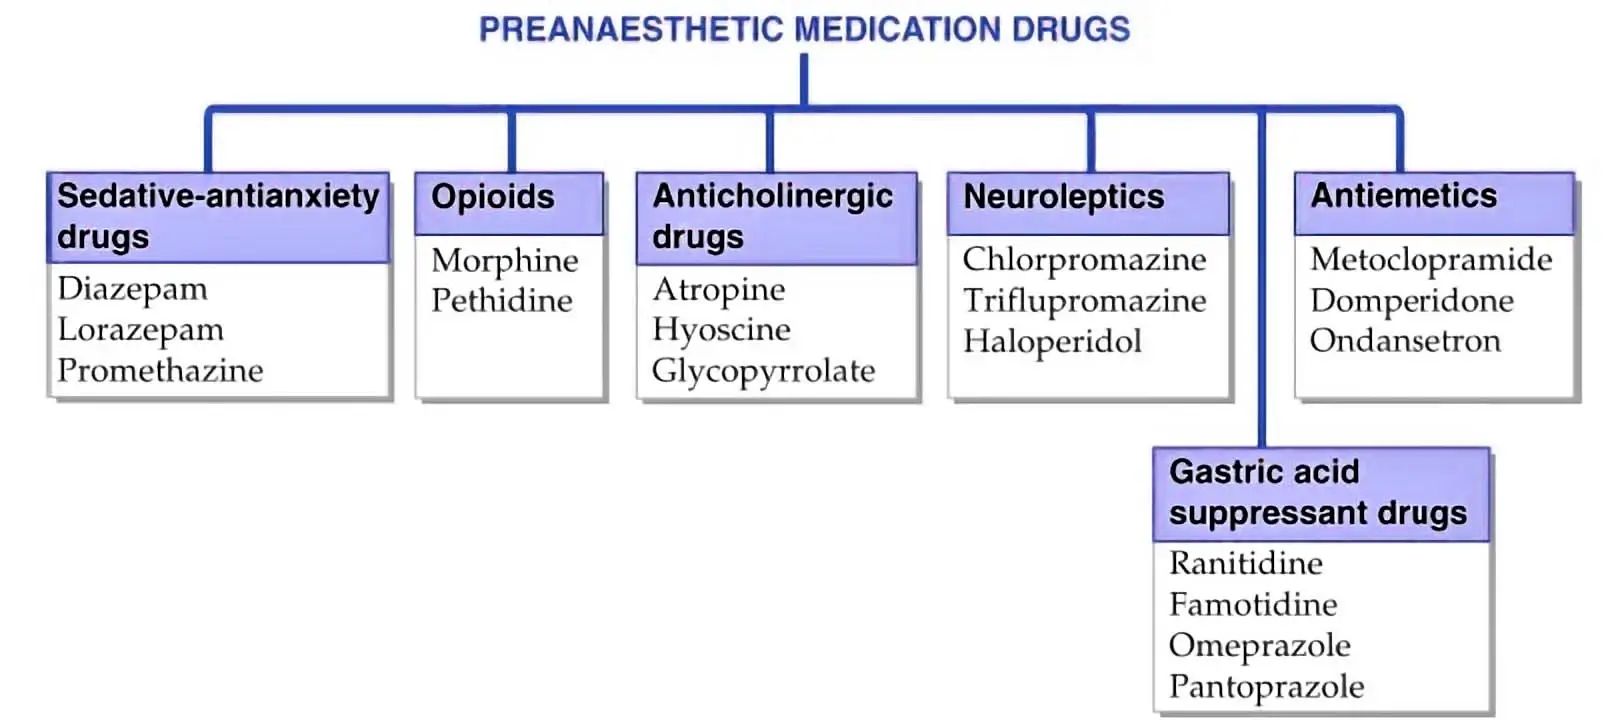 Pre-anesthetic Medication Drugs